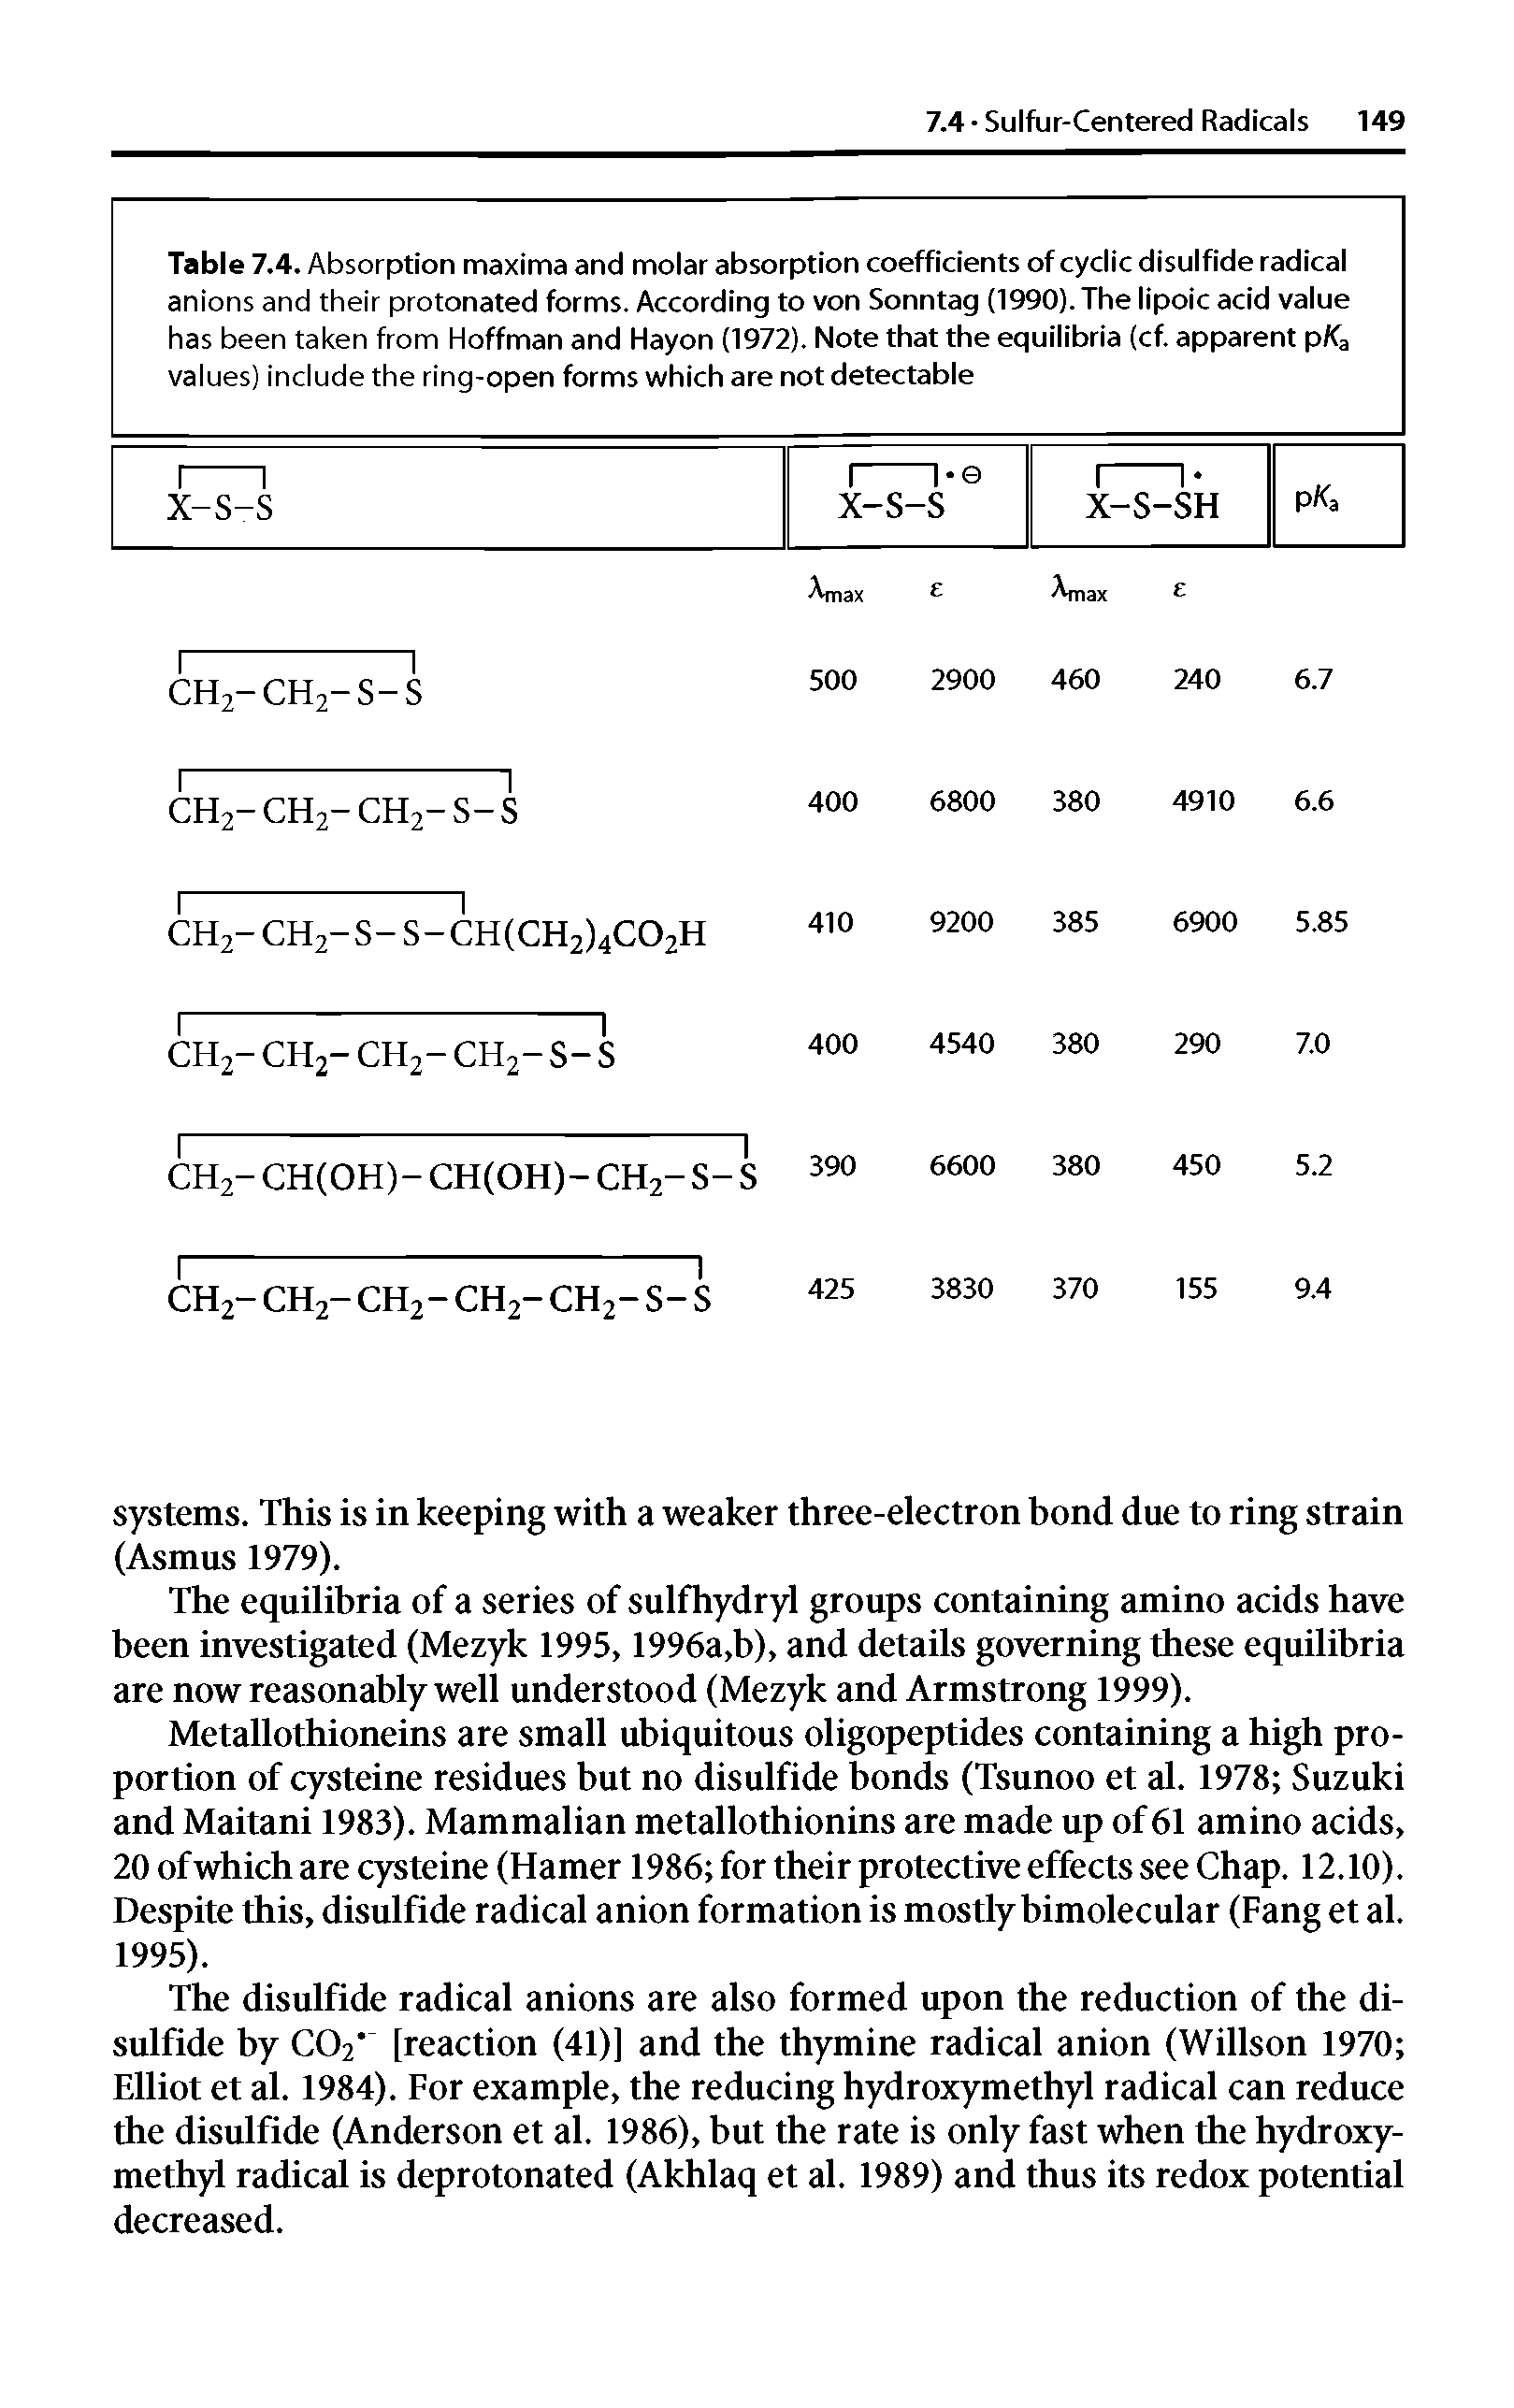 Table 7.4. Absorption maxima and molar absorption coefficients of cyclic disulfide radical anions and their protonated forms. According to von Sonntag (1990).The lipoic acid value has been taken from Hoffman and Hayon (1972). Note that the eguilibria (cf. apparent pKa values) include the ring-open forms which are not detectable...